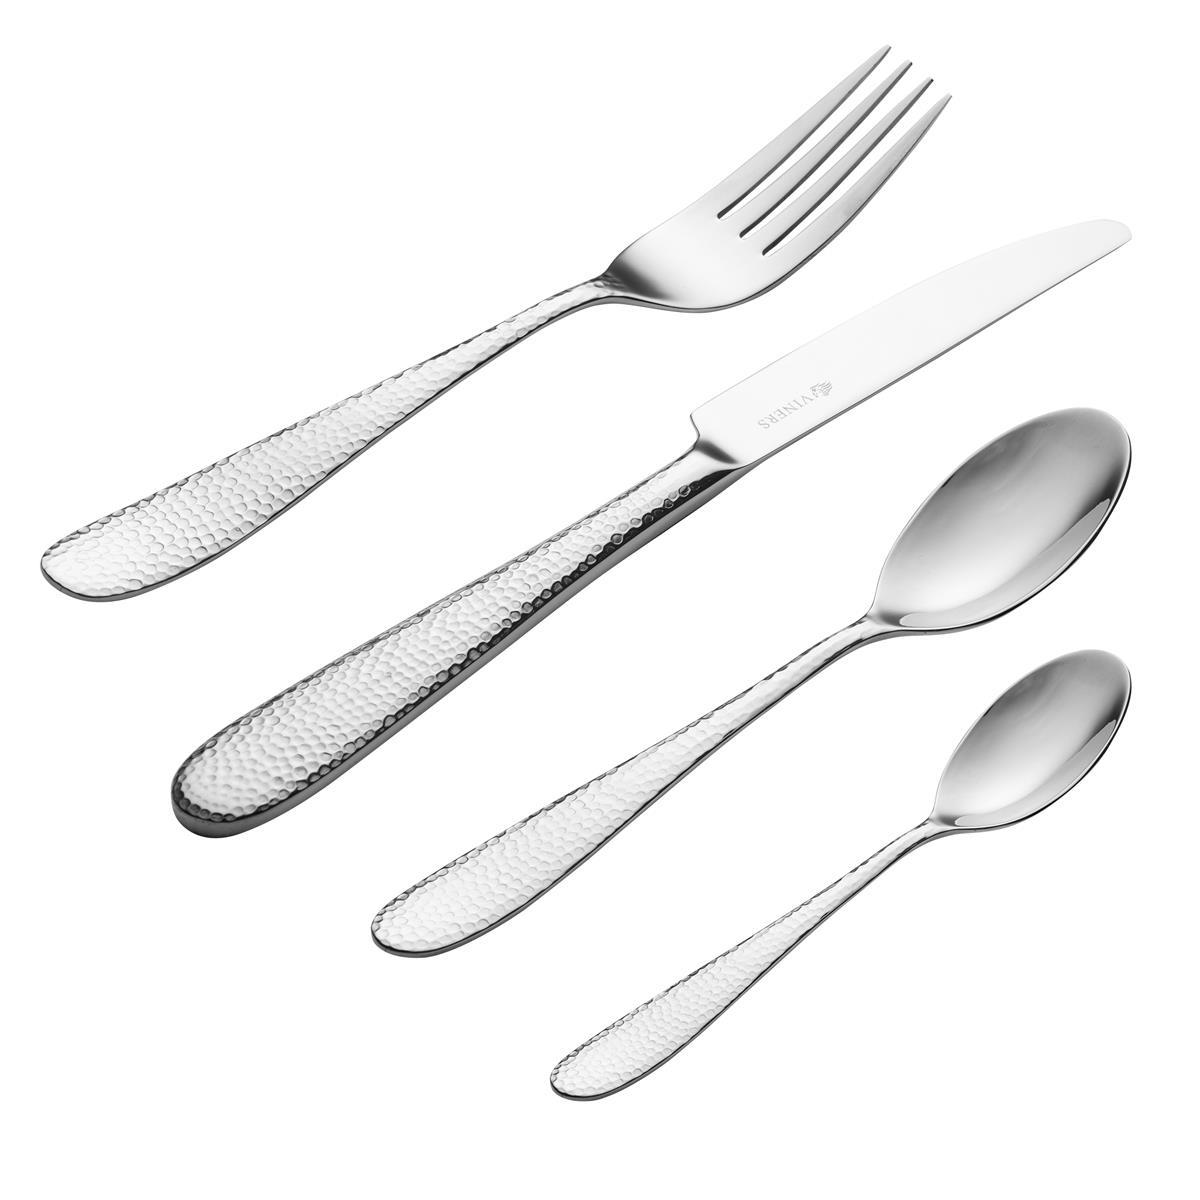 Does the Viners Glamour Cutlery Set offer a guarantee?